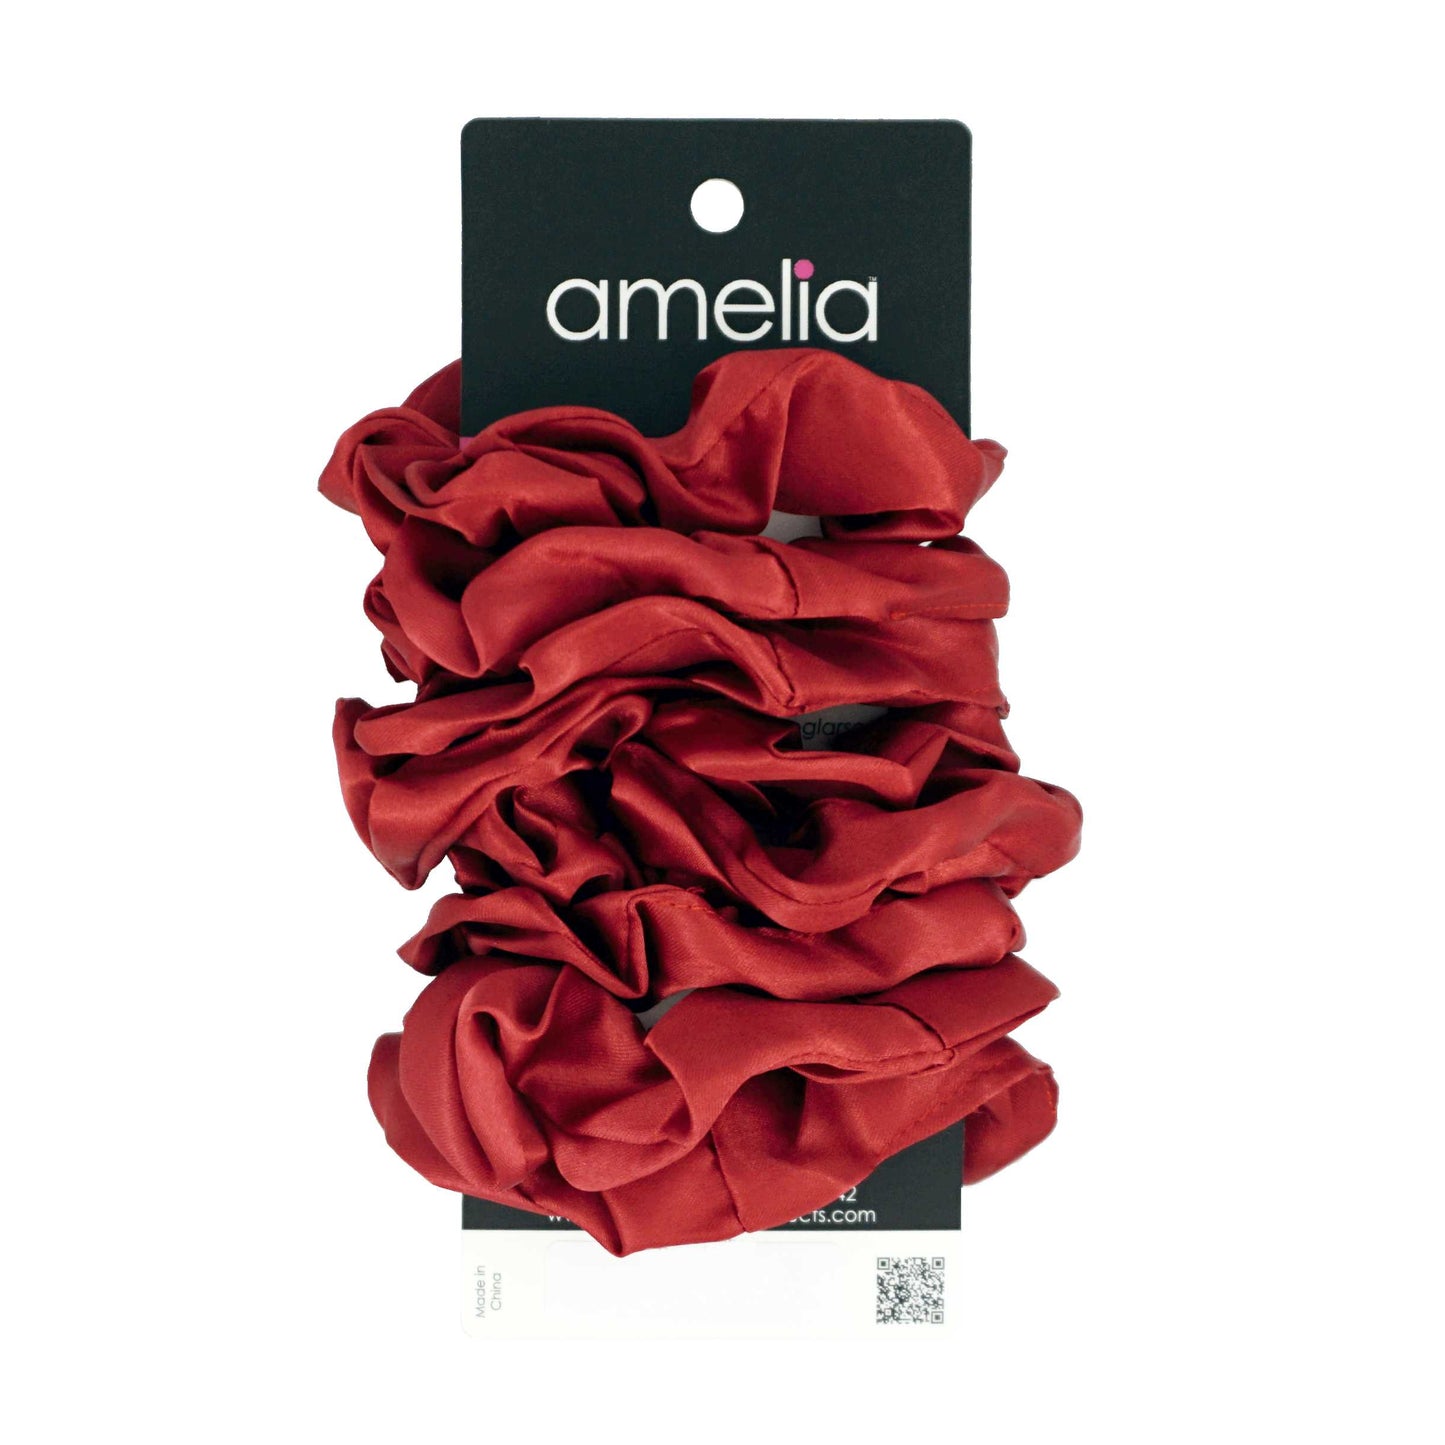 Amelia Beauty Products, Burnt Red Satin Scrunchies, 3.5in Diameter, Gentle on Hair, Strong Hold, No Snag, No Dents or Creases. 8 Pack